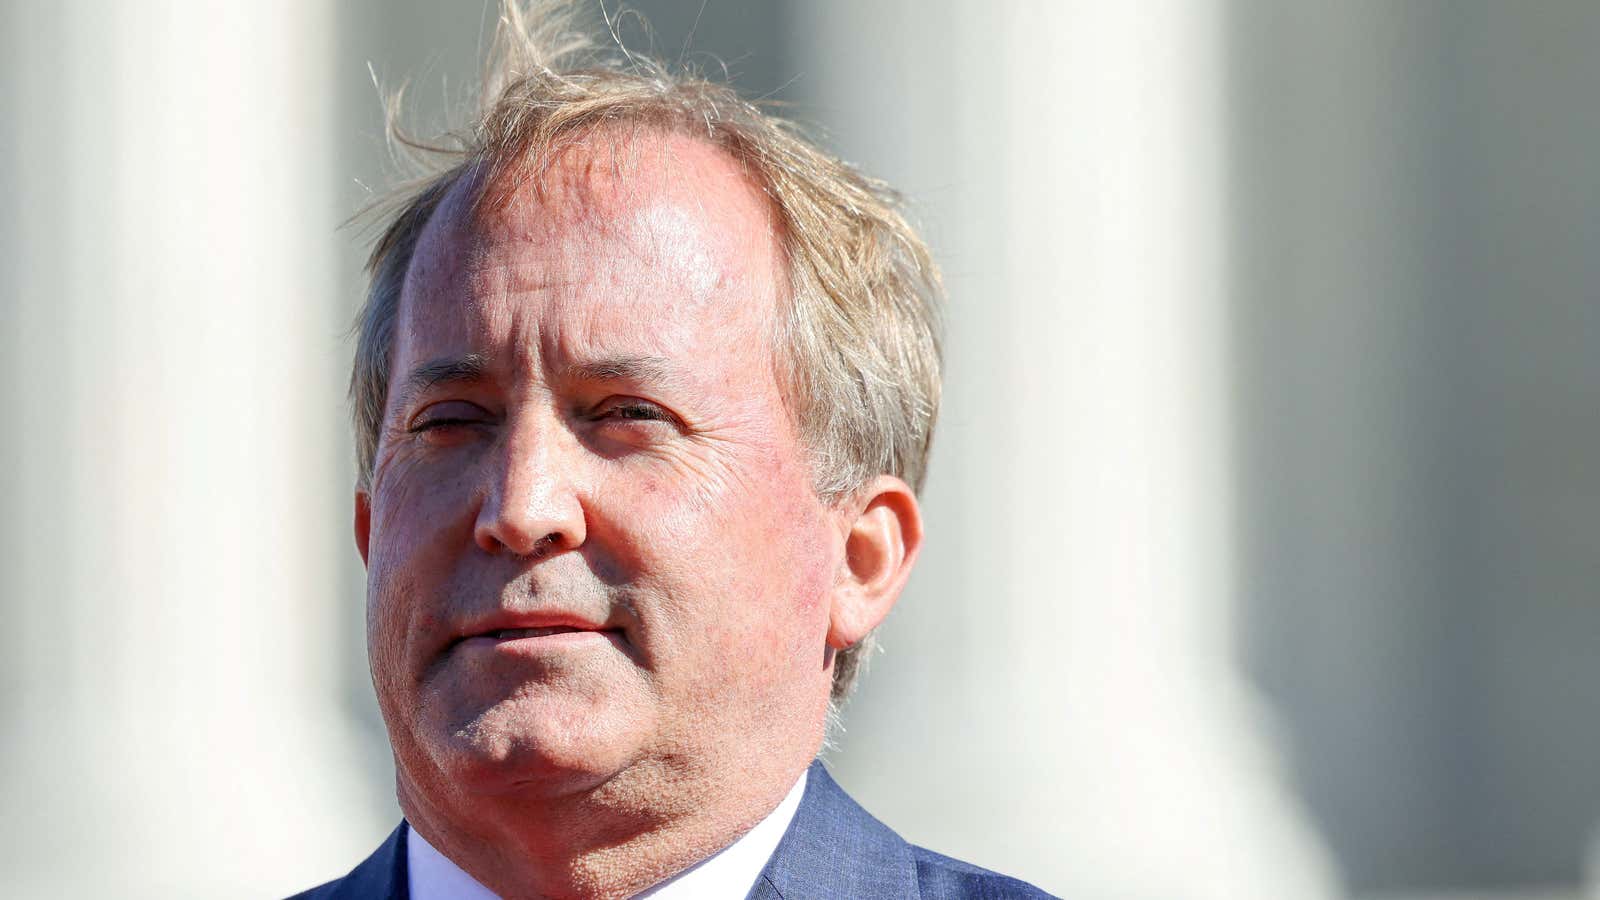 Texas Attorney General Ken Paxton appealed the district court’s decision staying the social media law.